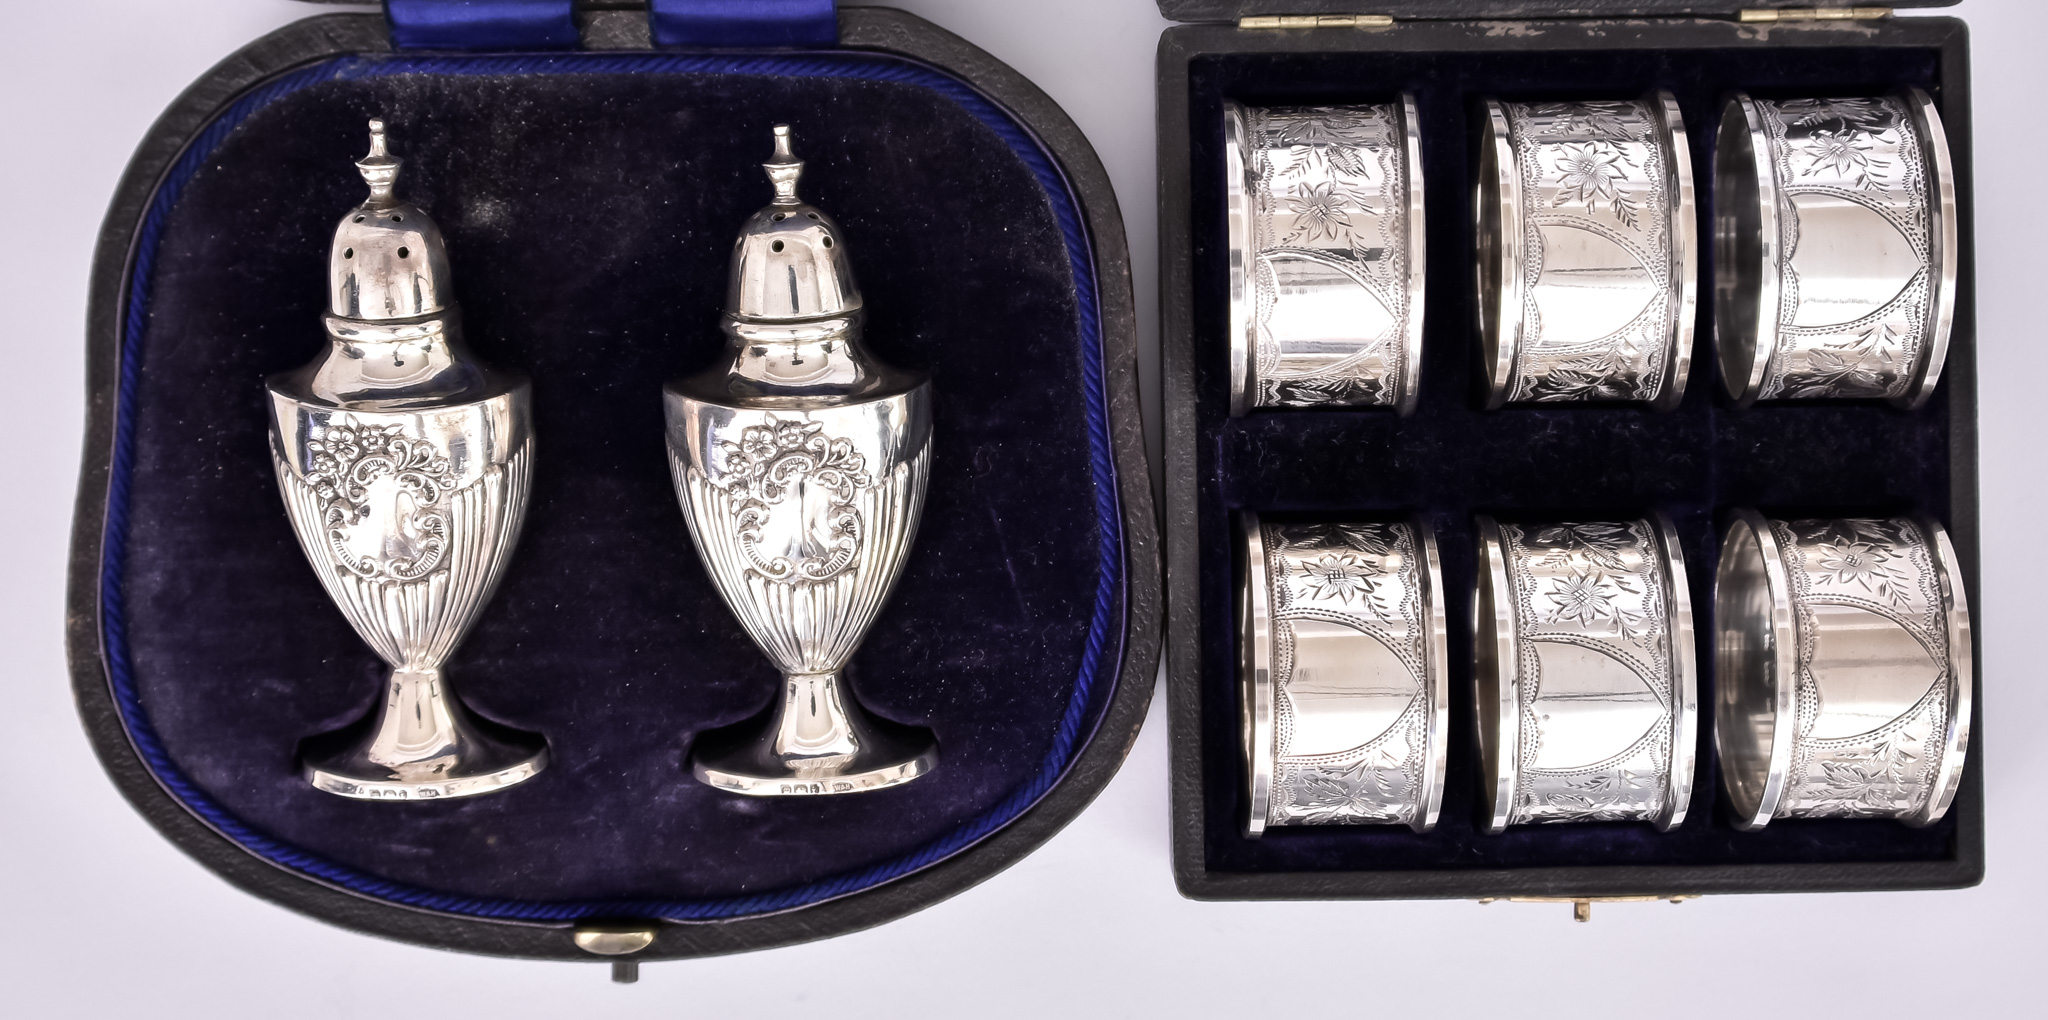 A Set of Six Edward VII Silver Napkin Rings and a Pair of Pepper Pots, the napkin rings by